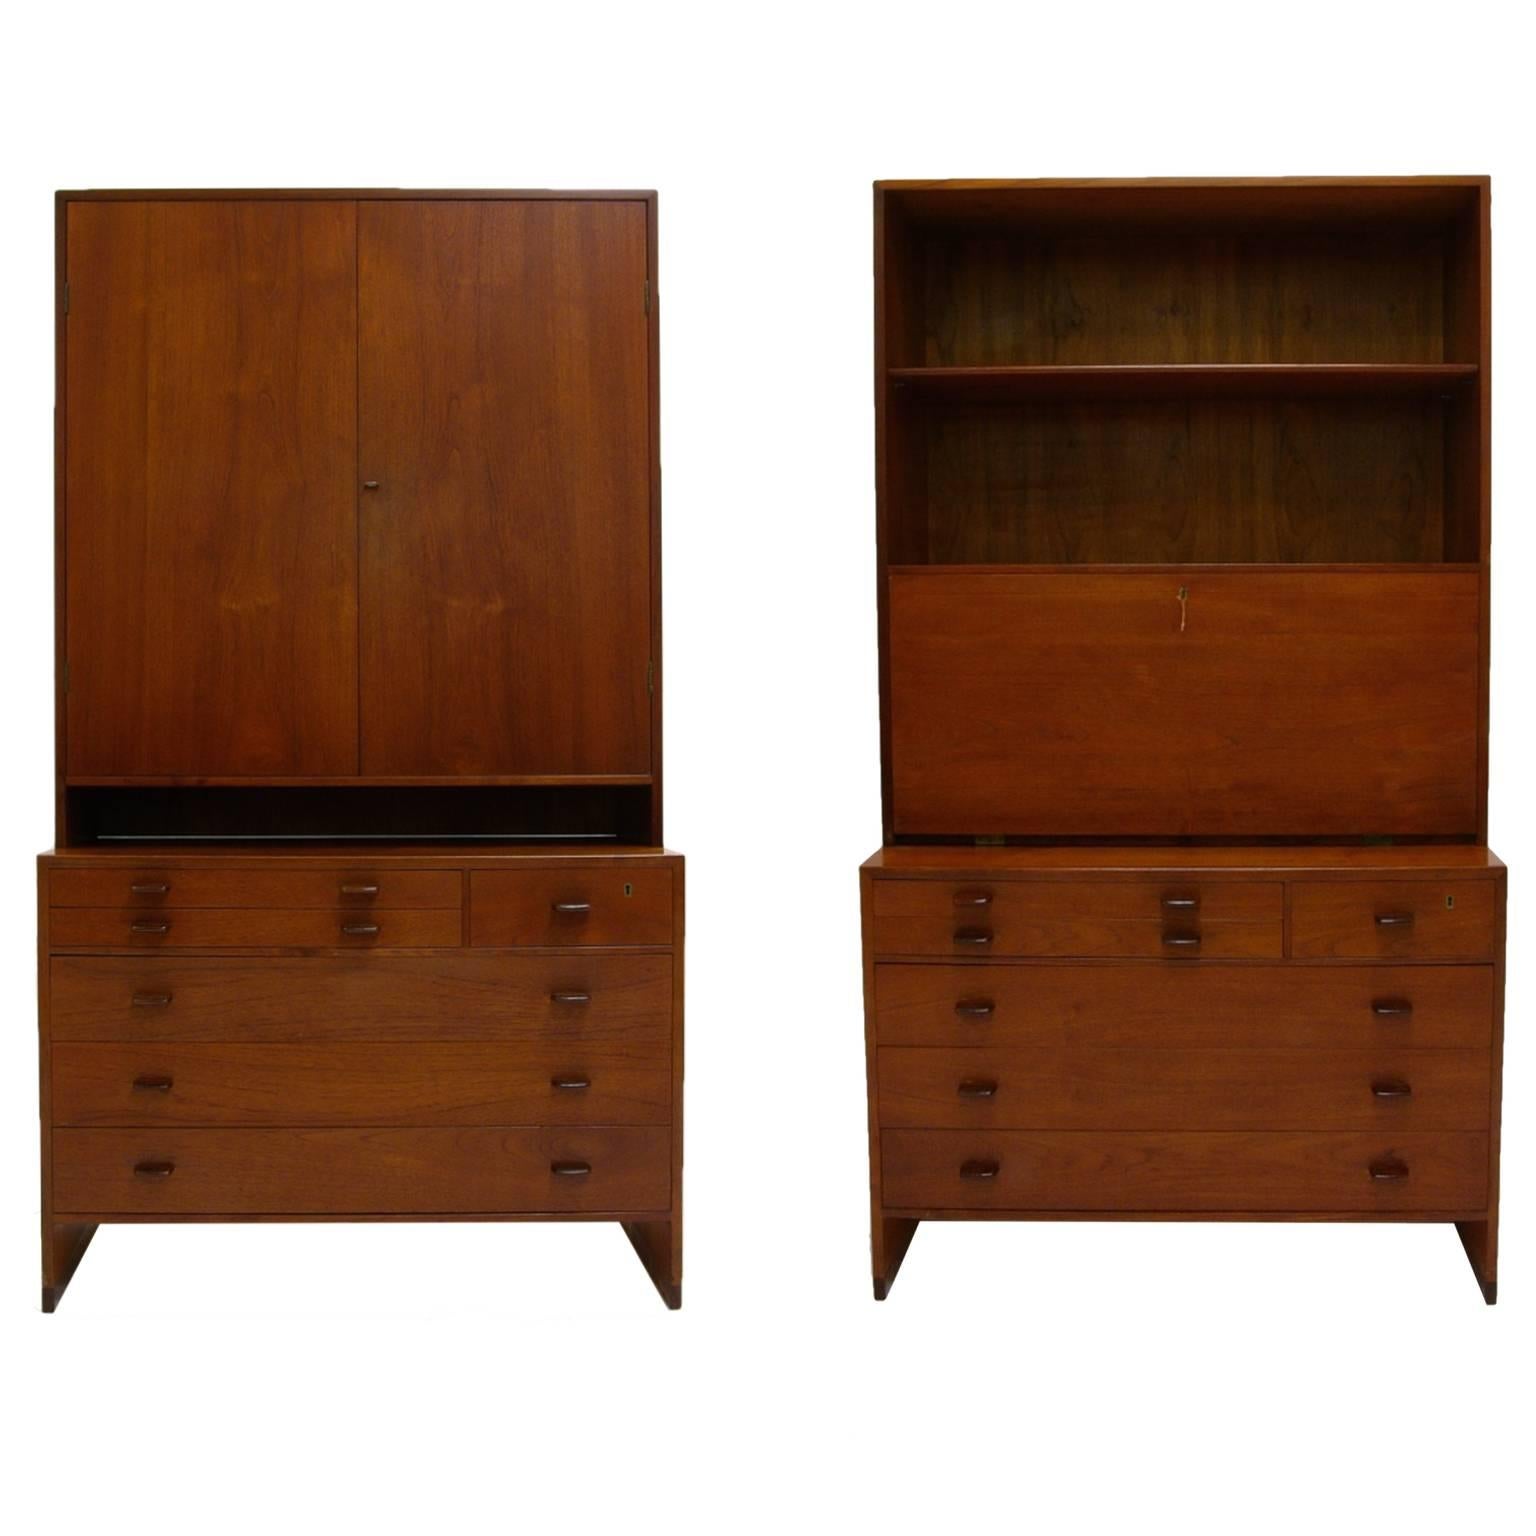 Stunning pair of all original Hans Wegner teak chests with functional top units. Each unit features a six-drawer chest. Each chest has a top drawer that locks with a brass key and also two felt lined top drawers. One of the unit has a cabinet that